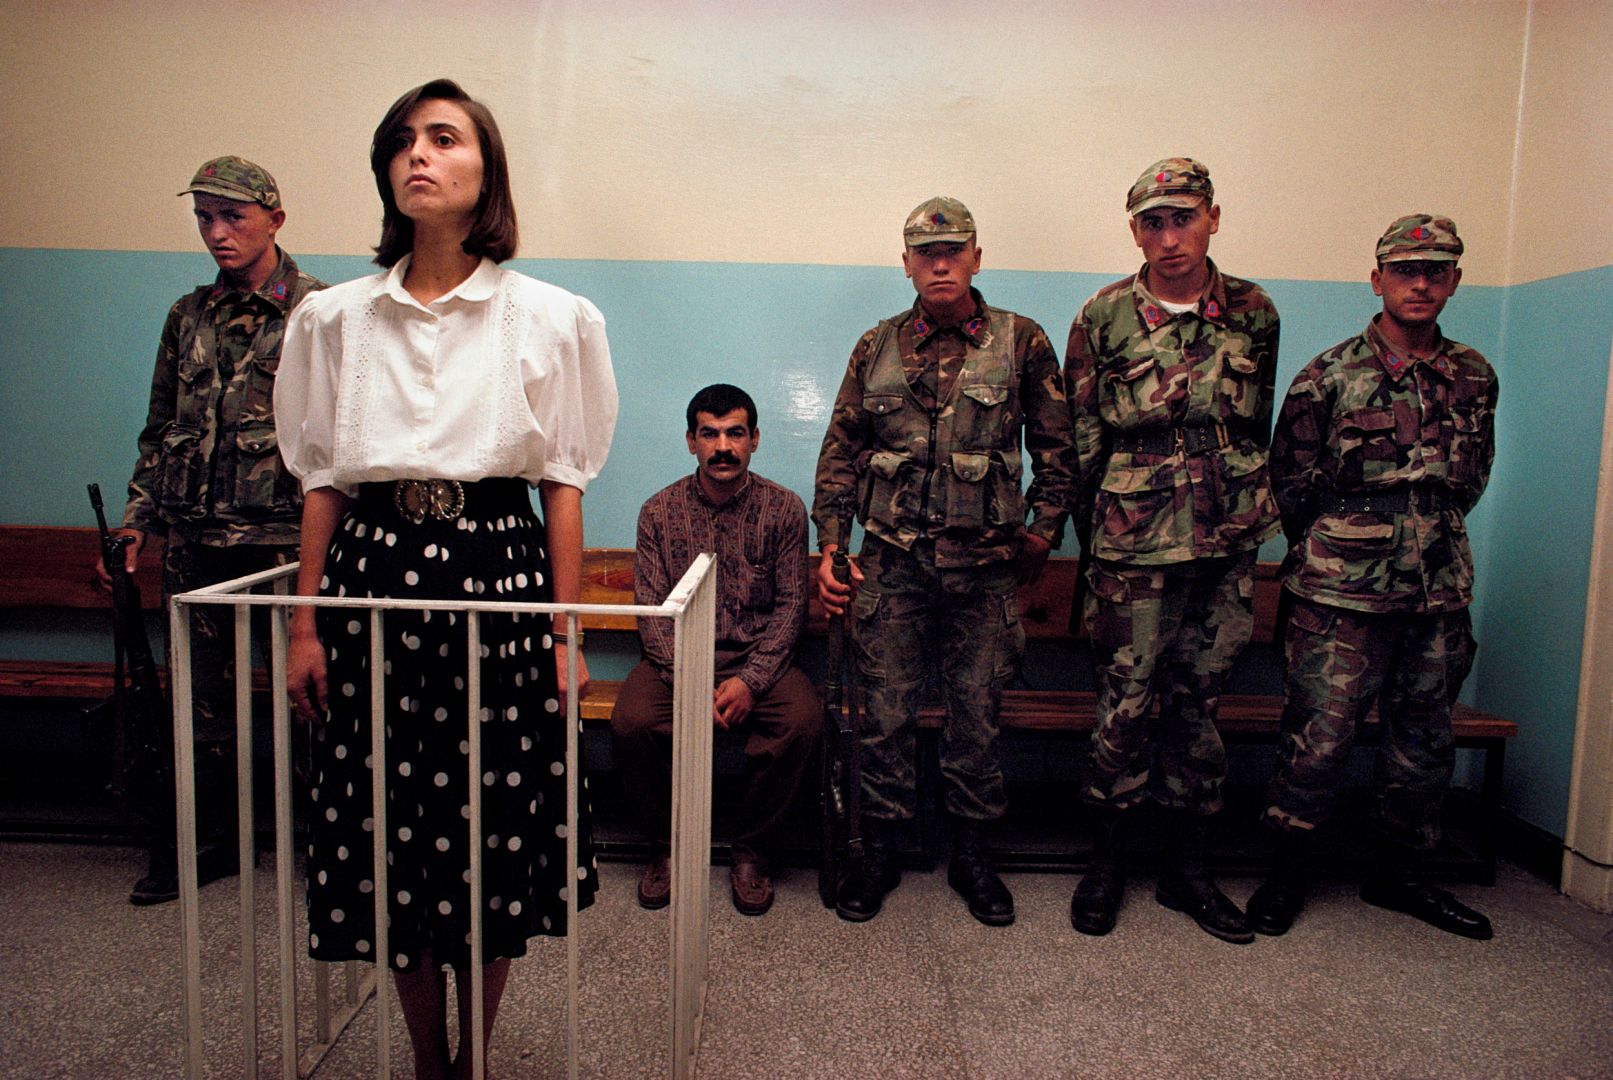 In a Turkish terrorist court in Diyarbakir, this Kurdish woman was sentenced to 13 years in prison, accused of belonging to the Kurdistan Workers Party, or PKK, which seeks to create an independent state in southeastern Turkey, 2006